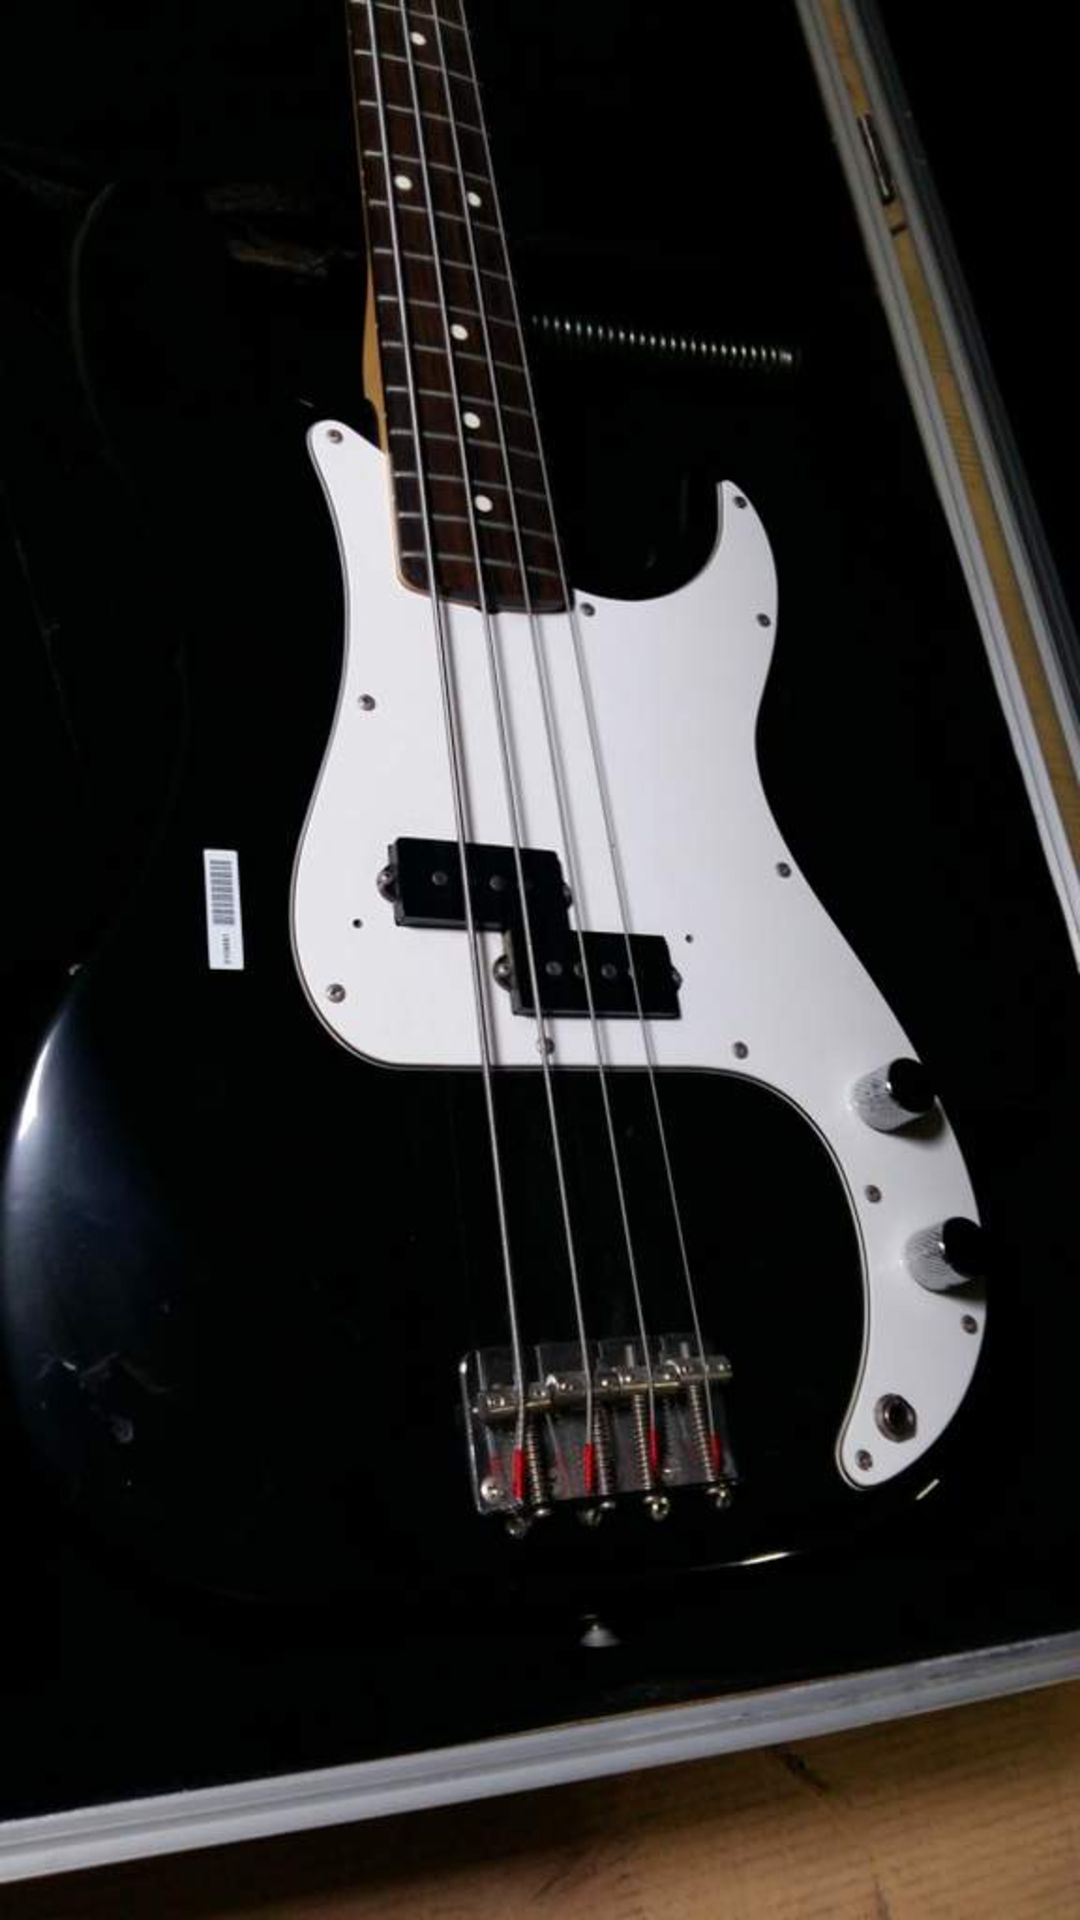 Fender 4 string bass guitar in carry case - Image 2 of 4